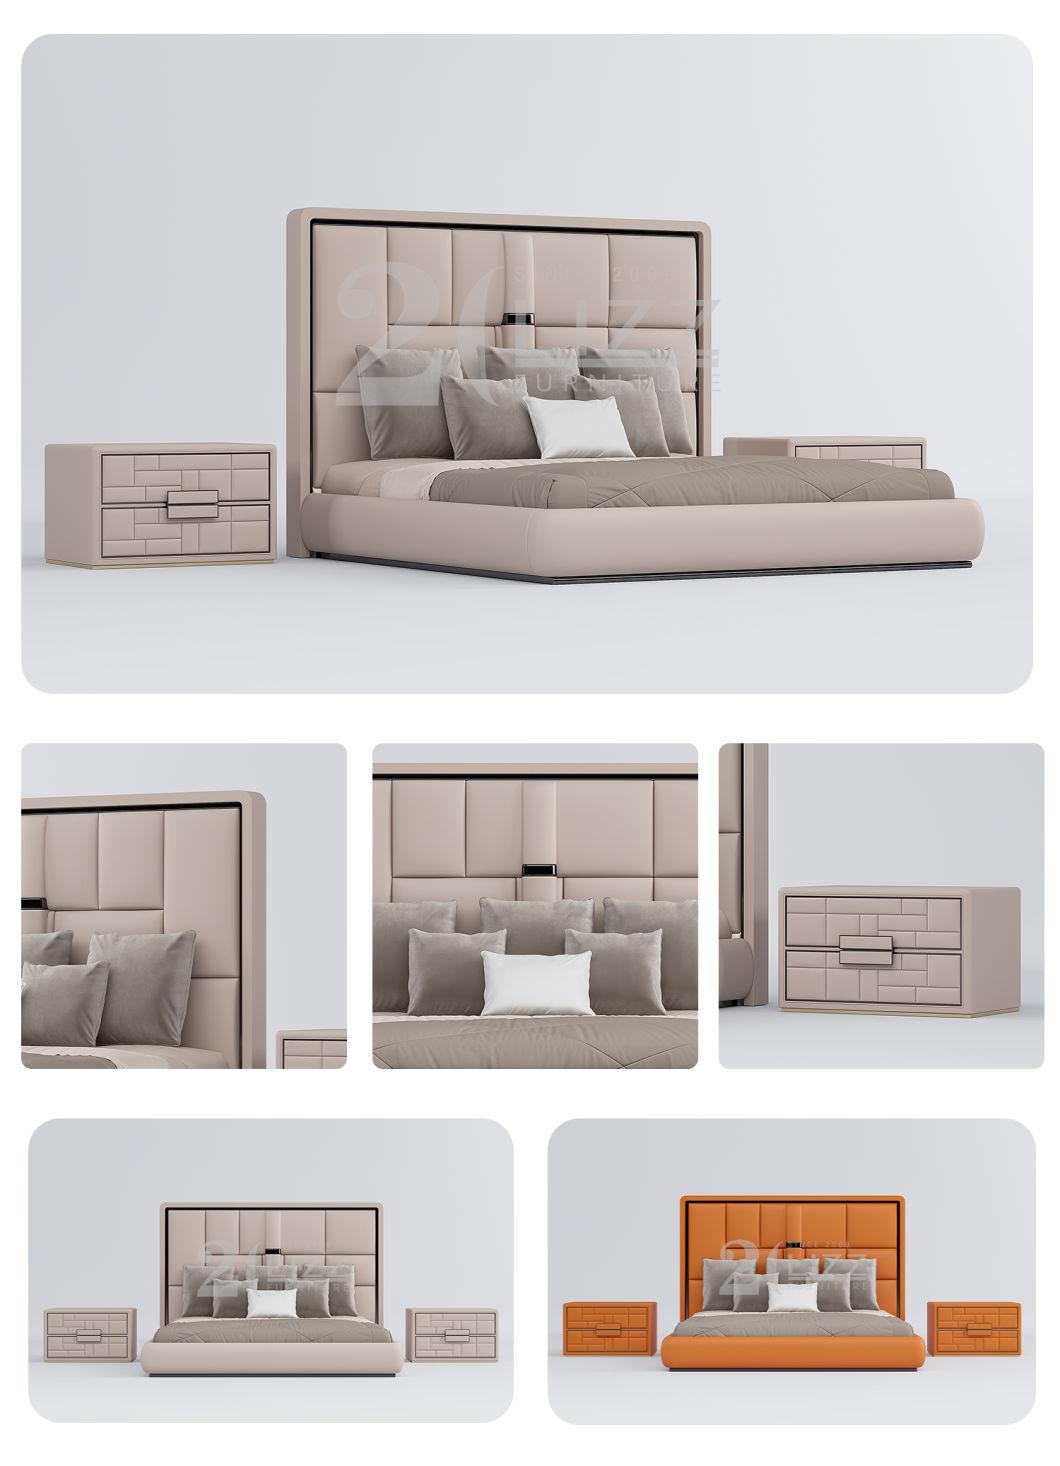 Modern European Home Furniture Bedroom Luxury Fabric Soft Big Size Bed